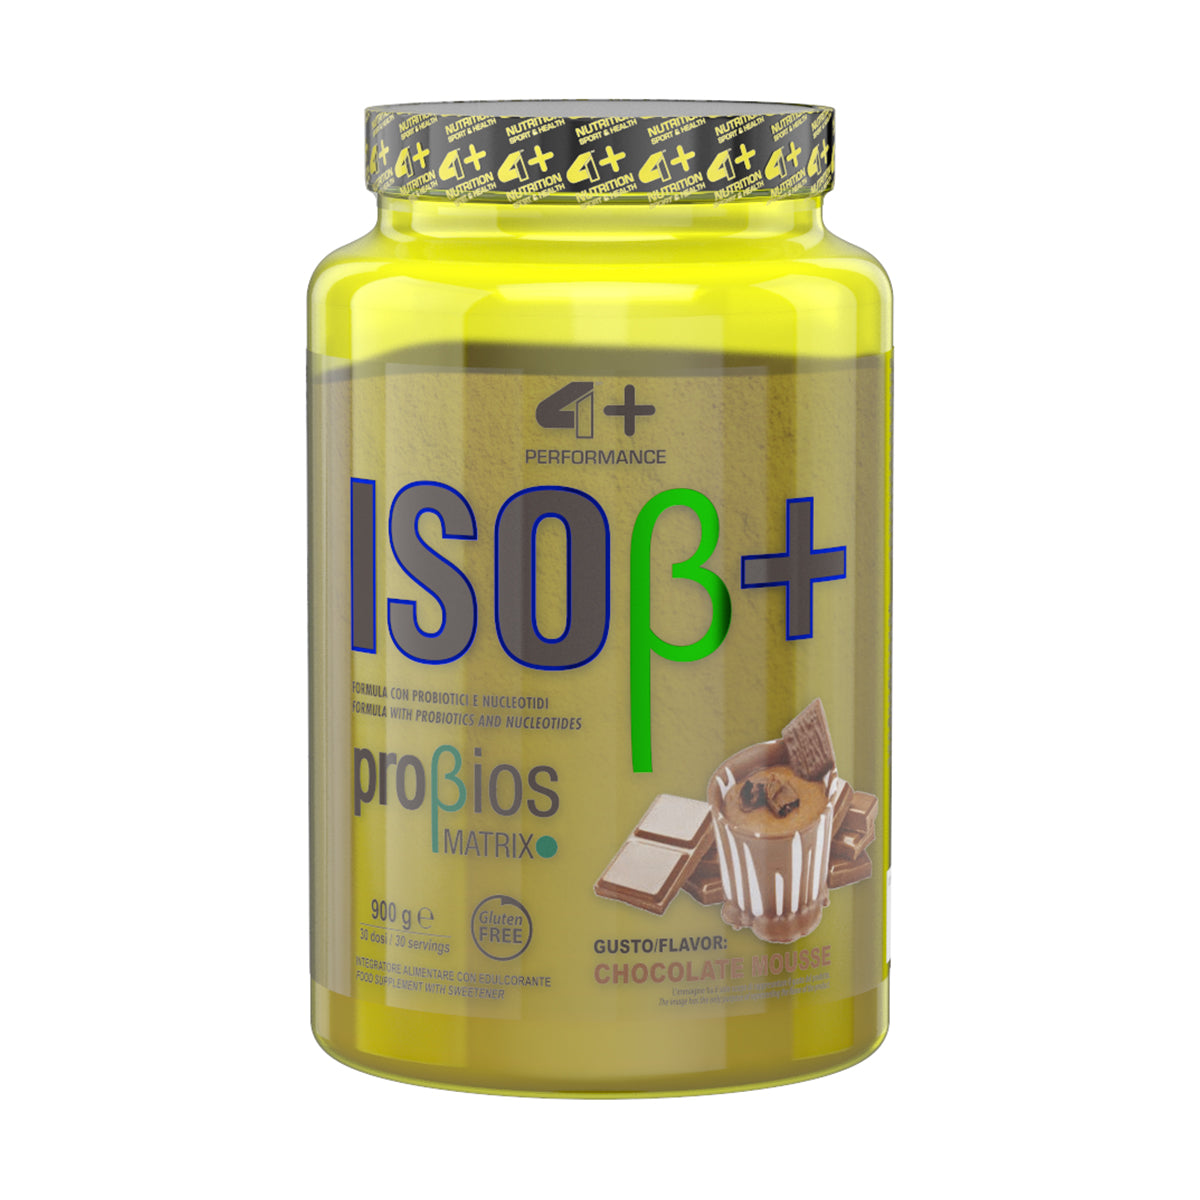 4+ Nutrition - ISO+ Whey Protein Isolate with Probiotics